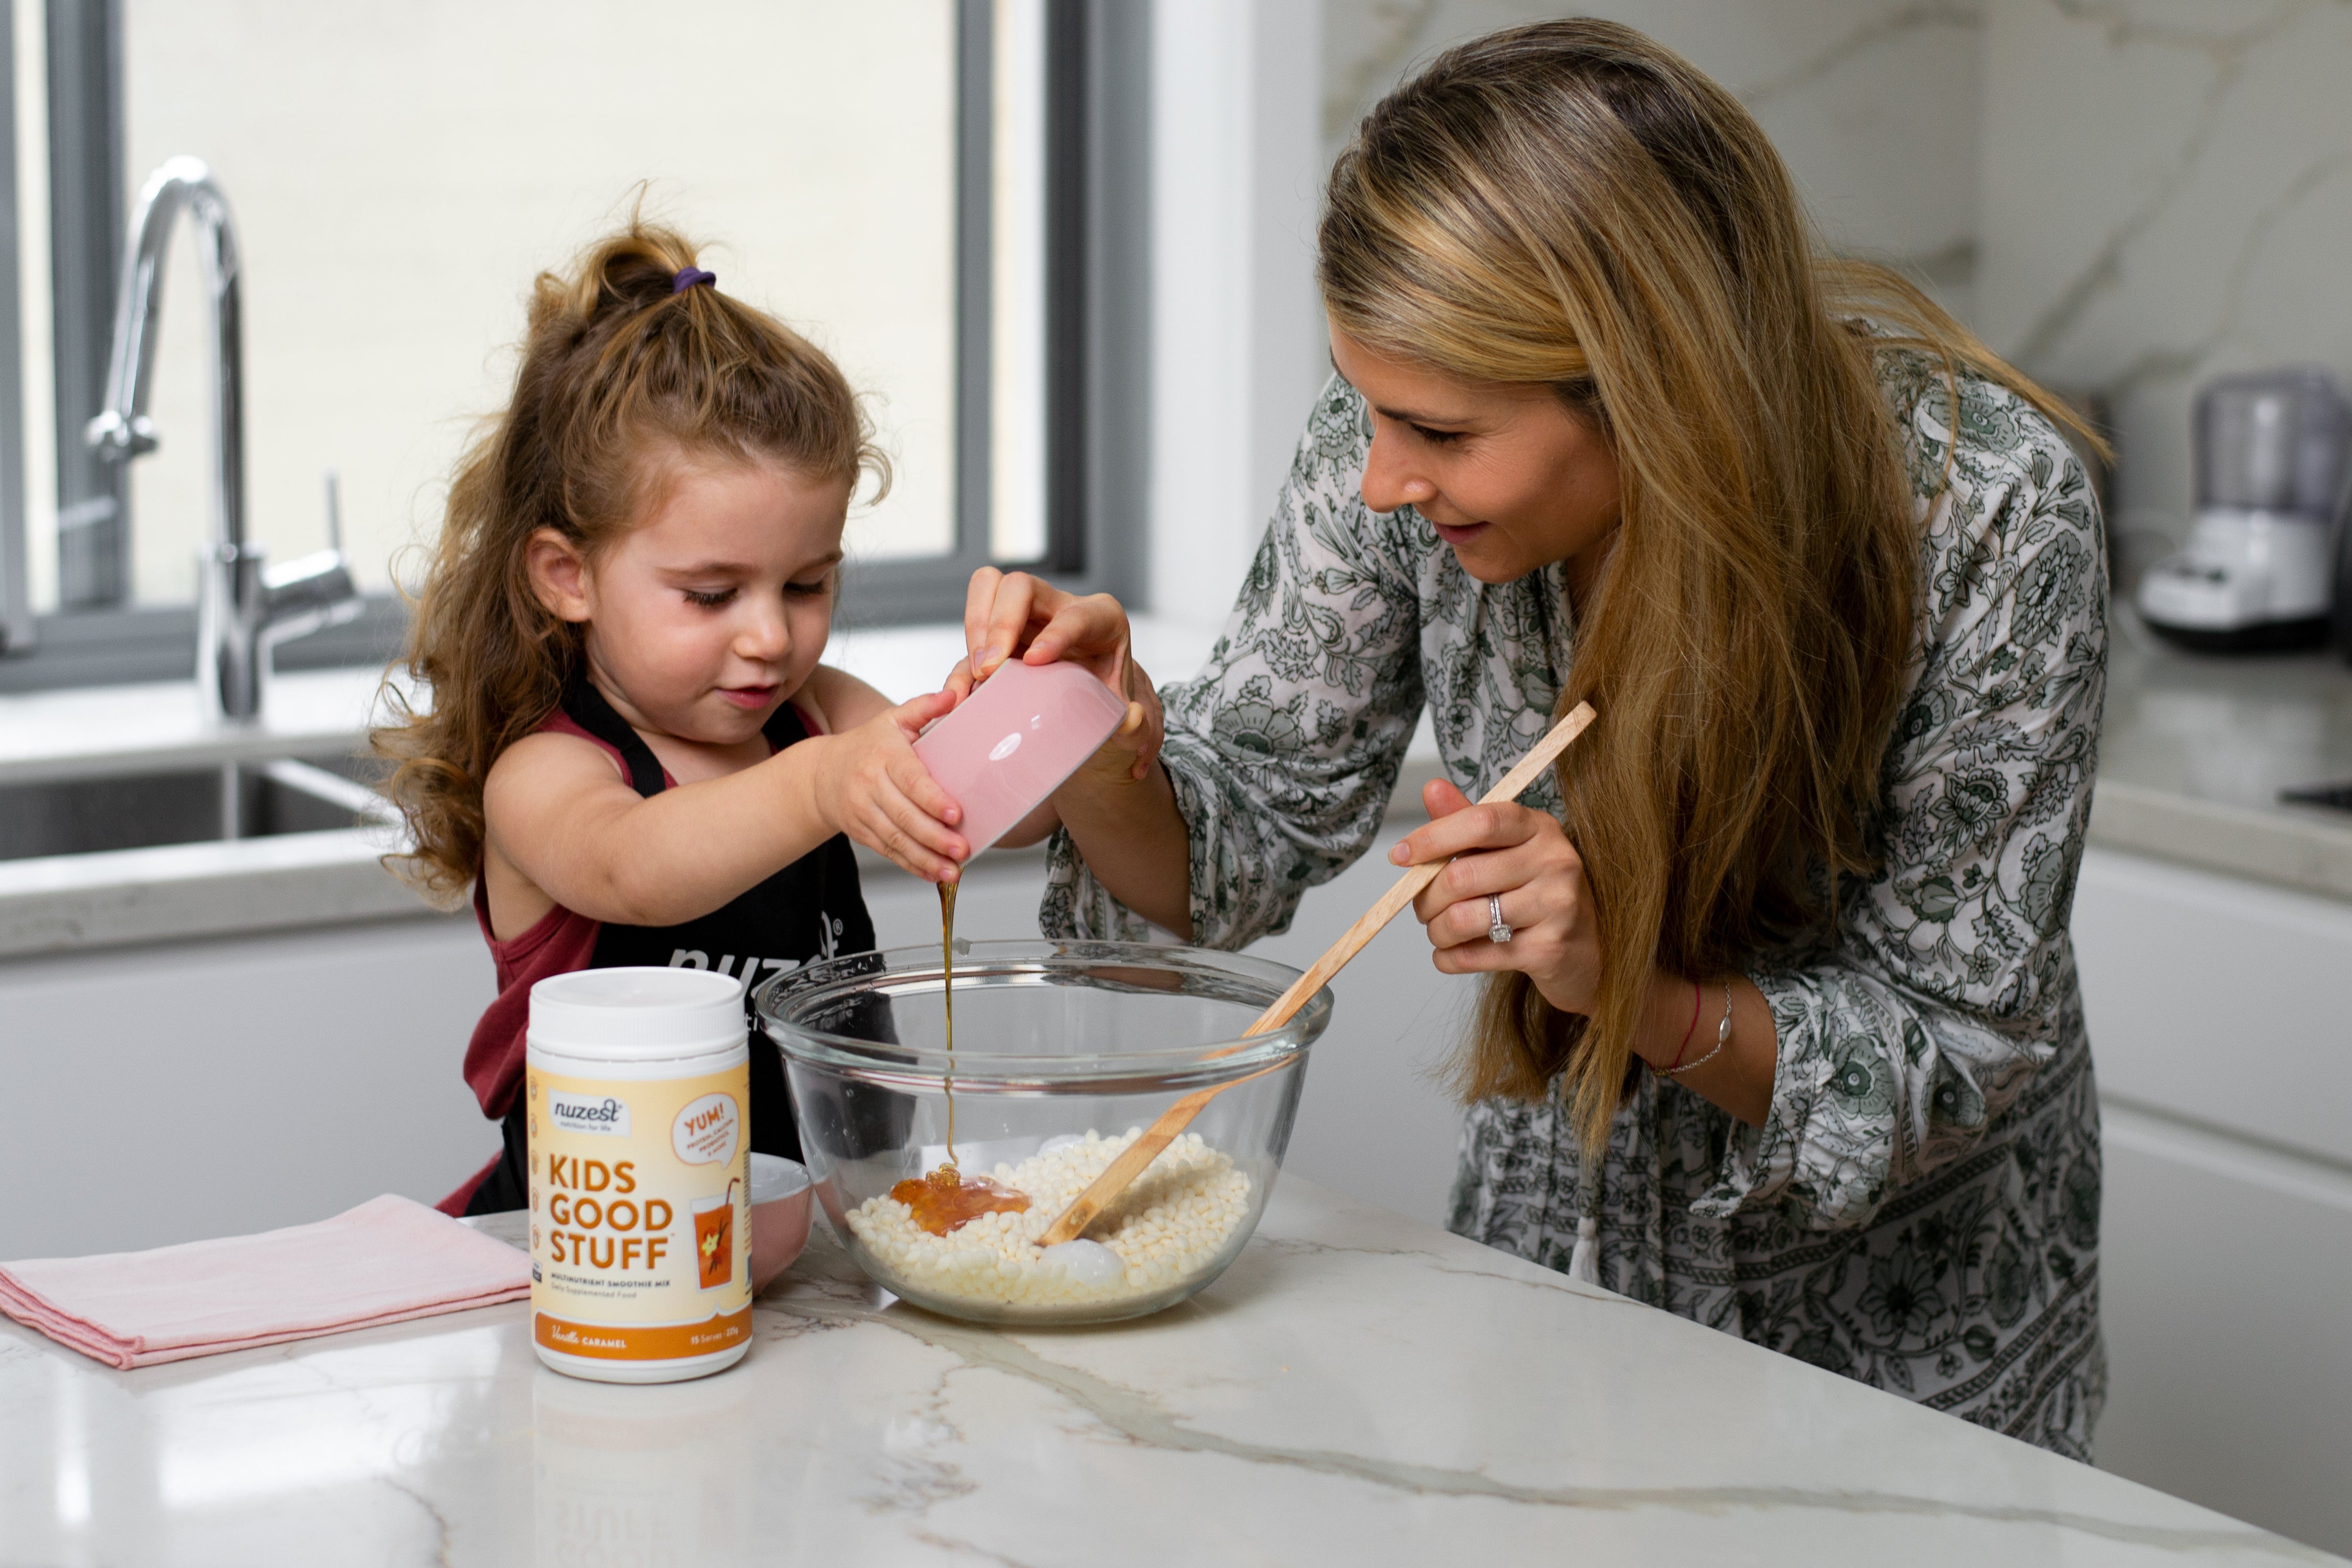 Easy tips to help your family eat better